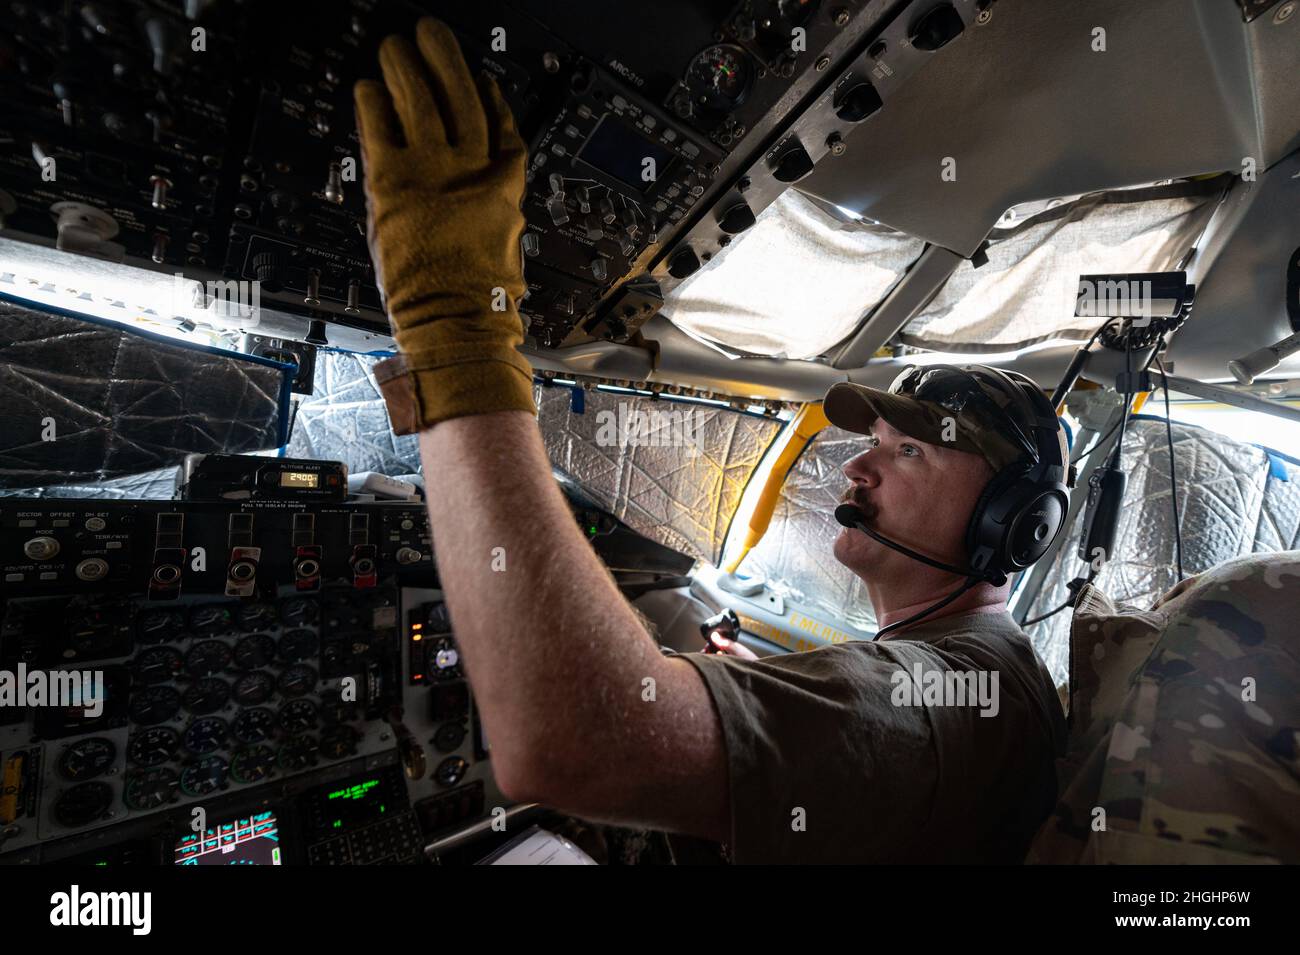 A U.S. Air Force KC-135R Stratotanker aircraft pilot, assigned to the 340th Expeditionary Air Refueling Squadron, works though his preflight checklist prior to an operation supporting Operation Freedom’s Sentinel at Al Udeid Air Base, Qatar, Aug. 6, 2021. The 340th EARS, deployed with U.S. Air Forces Central, is responsible for delivering fuel to U.S. and partner nations, enabling airpower, deterrence, and stability in the region. Stock Photo